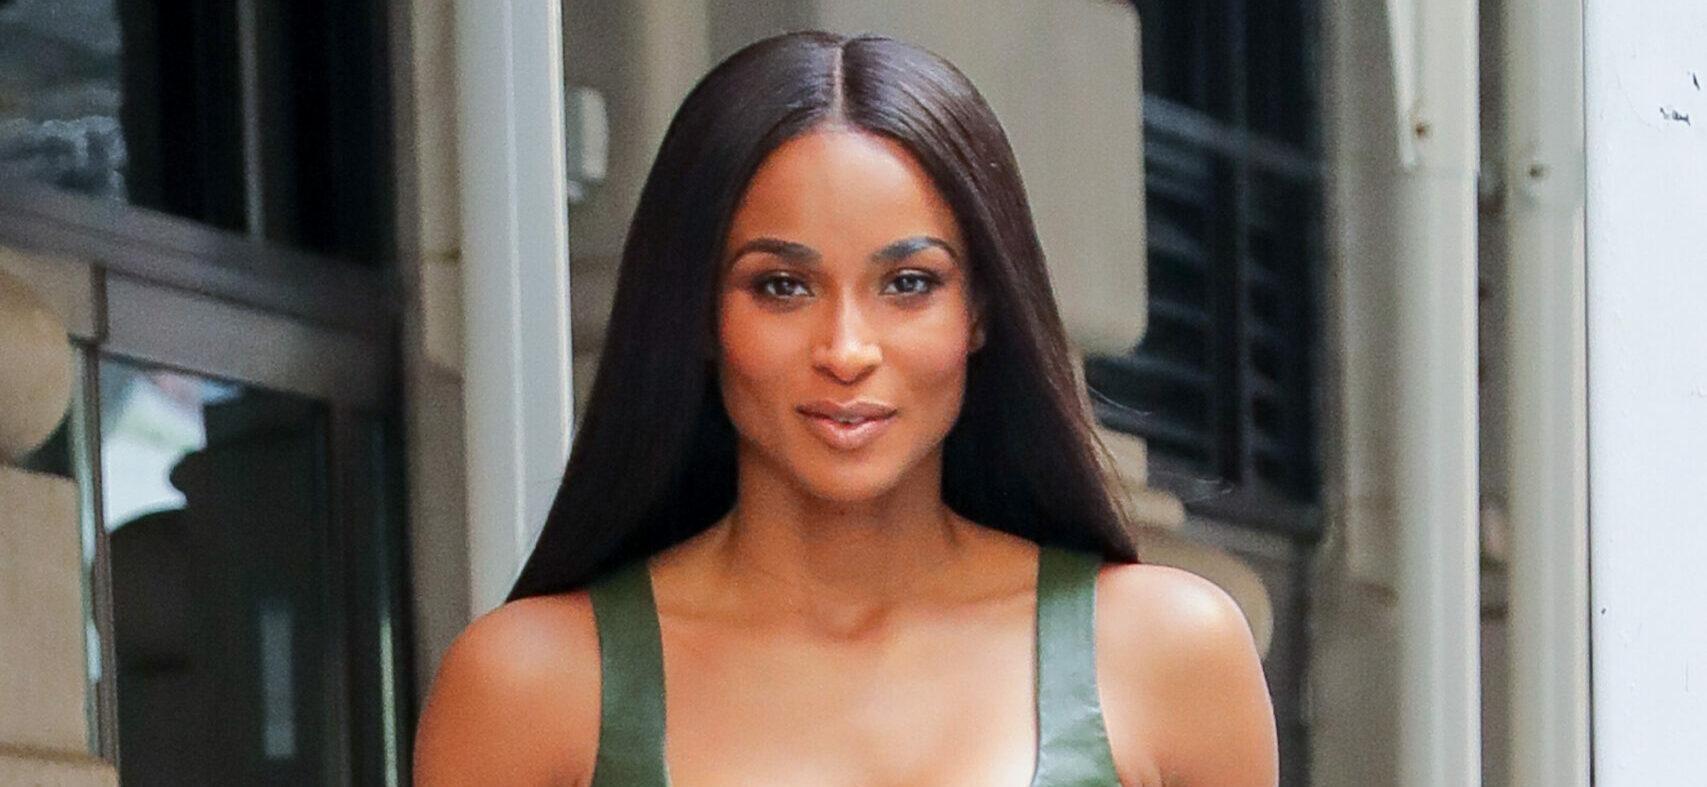 Ciara wears all green ensemble while leaving her hotel During New York Fashion Week